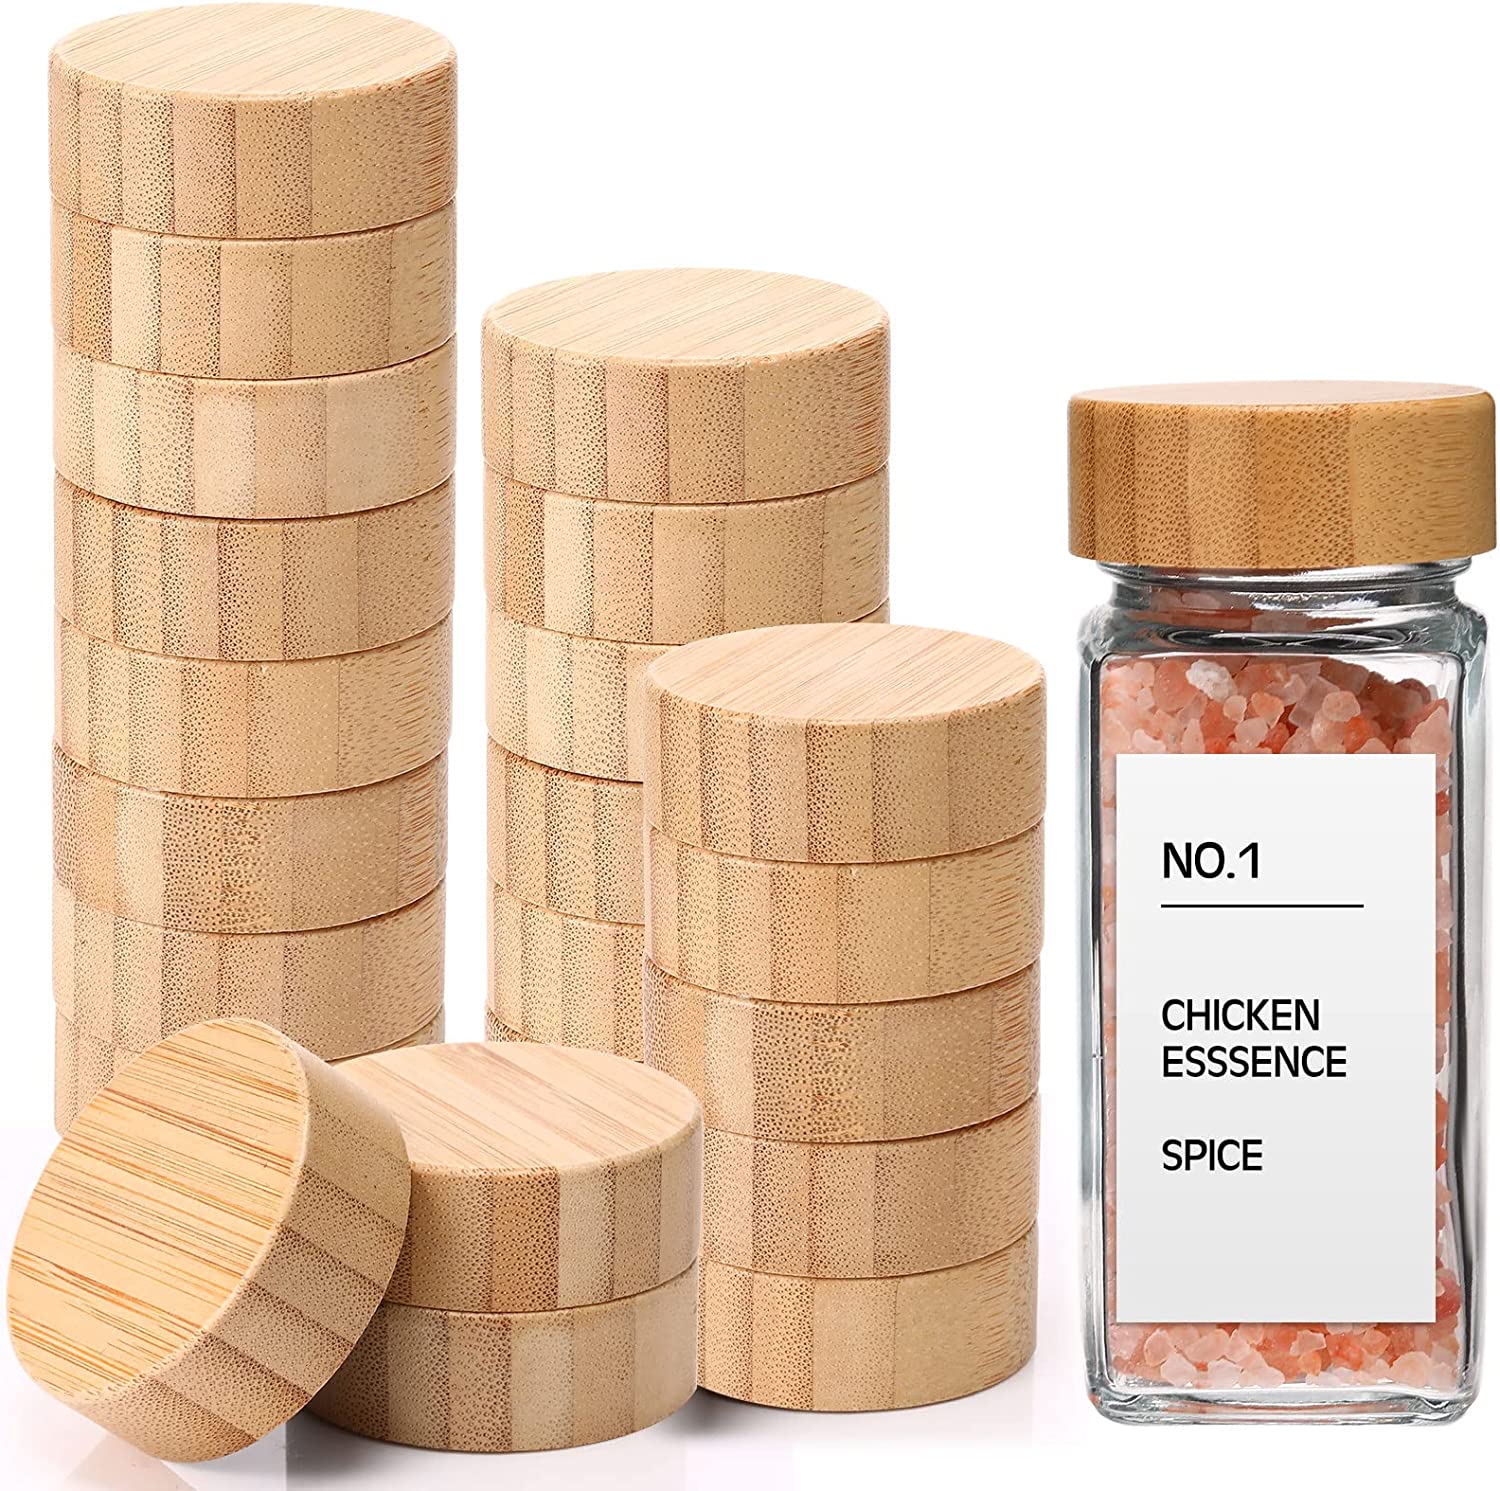 12 Pcs Square Glass Spice Jars with Natural Bamboo Lids - 5Oz Airtight Herb